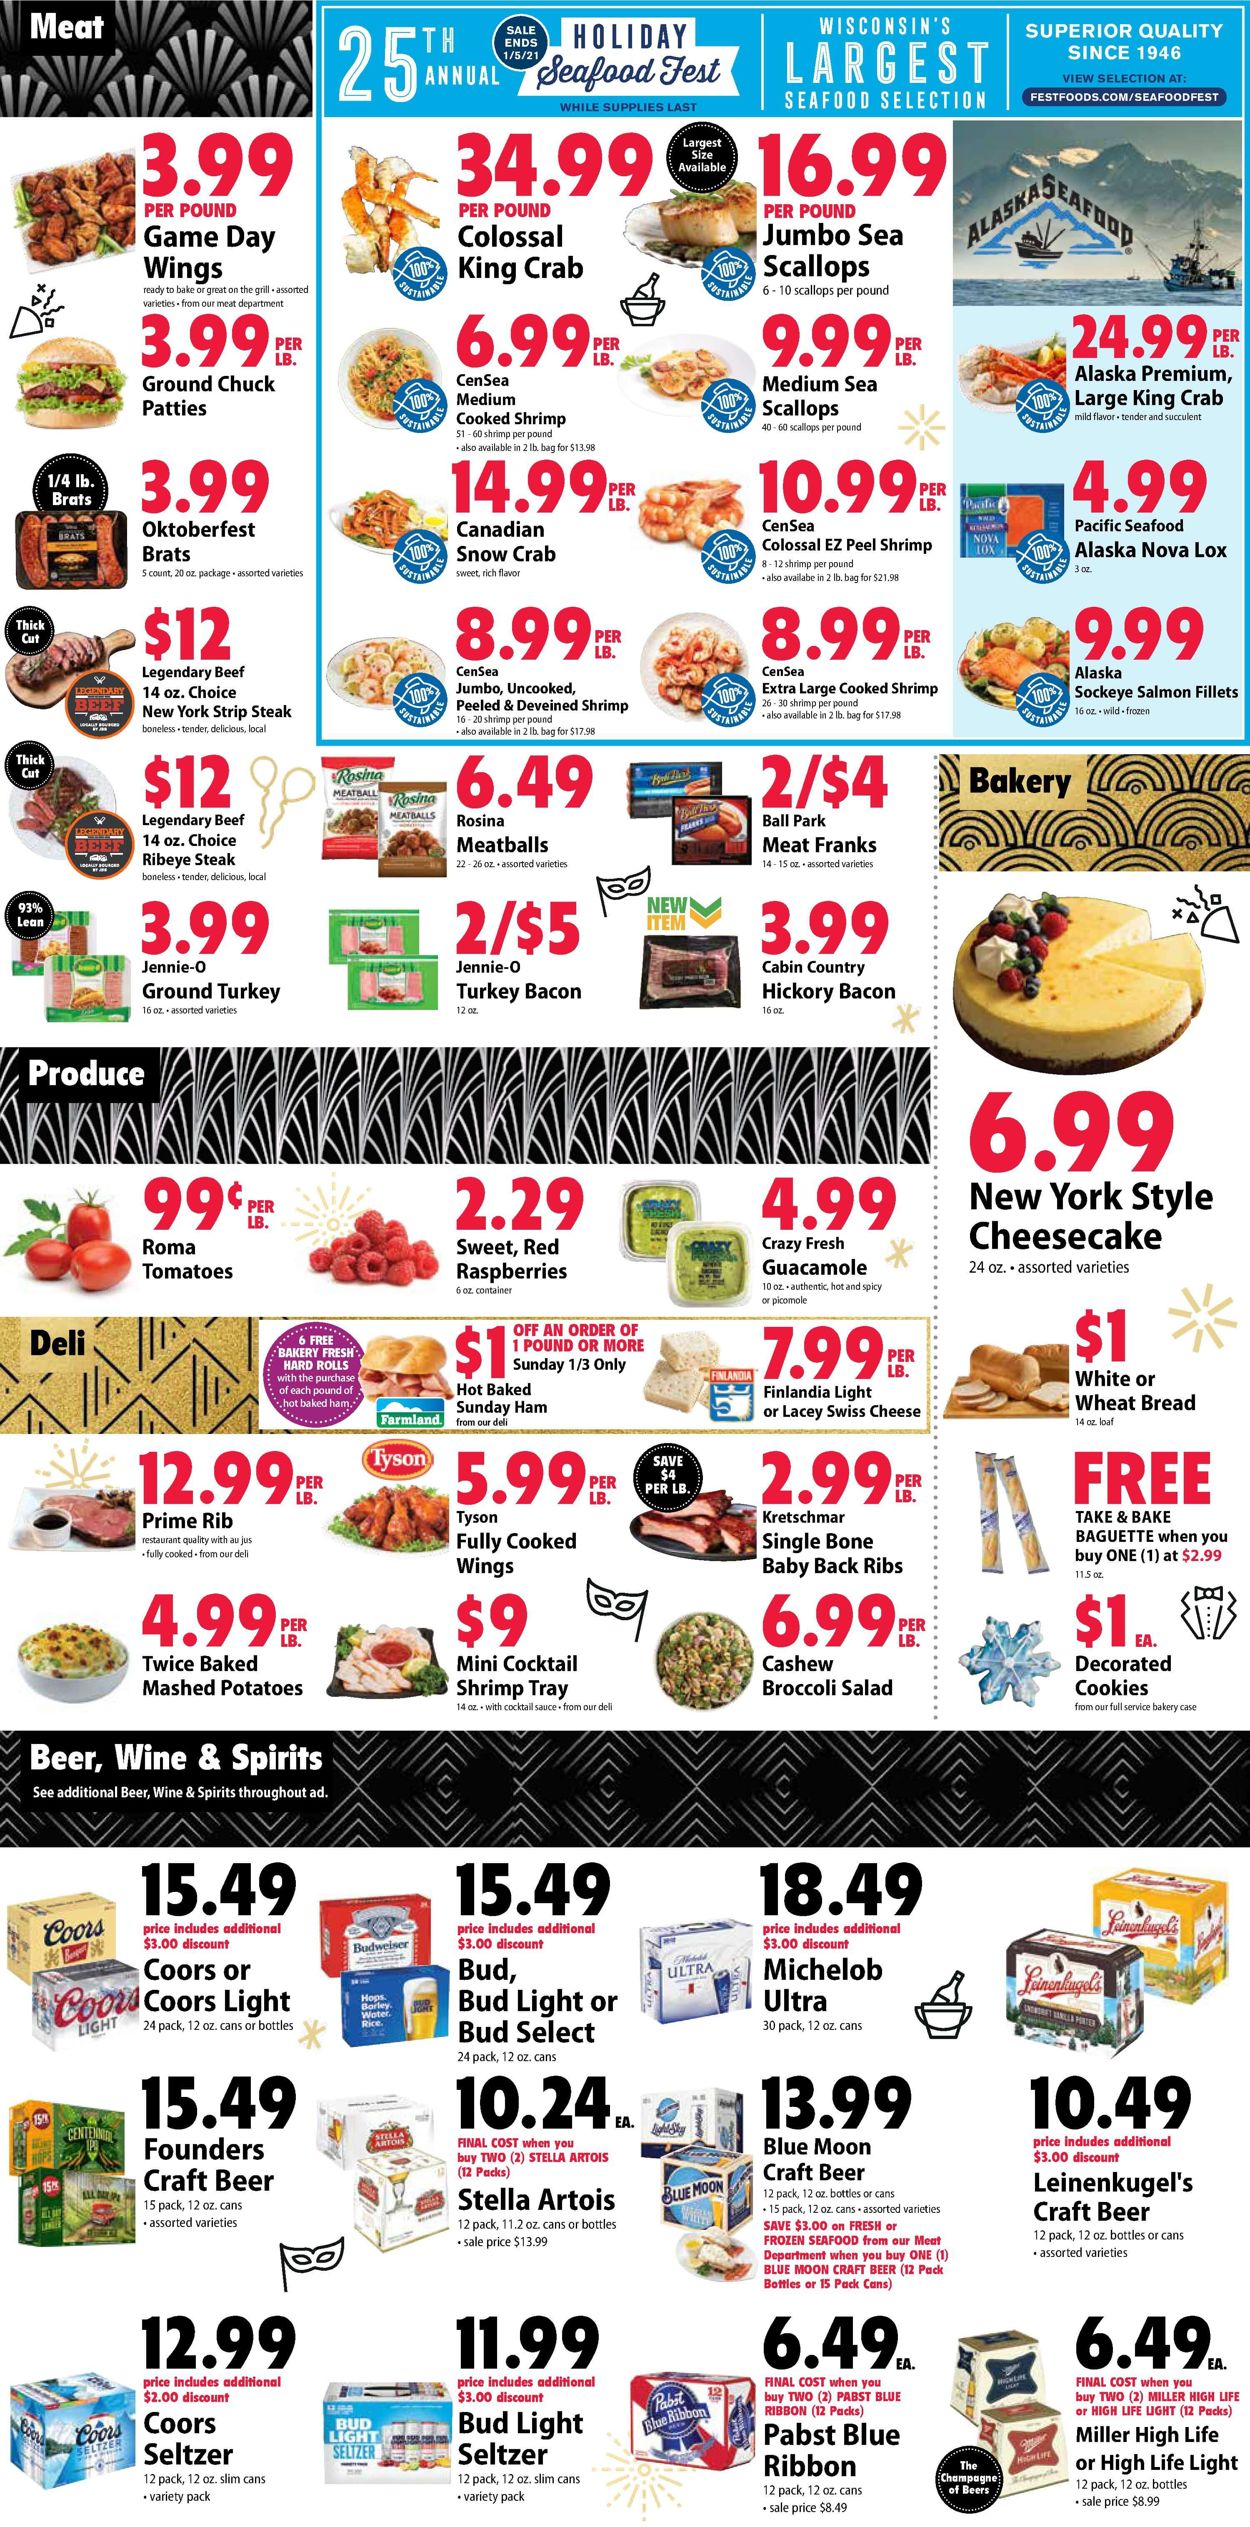 Festival Foods Current weekly ad 12/30 - 01/05/2021 [2] - frequent-ads.com